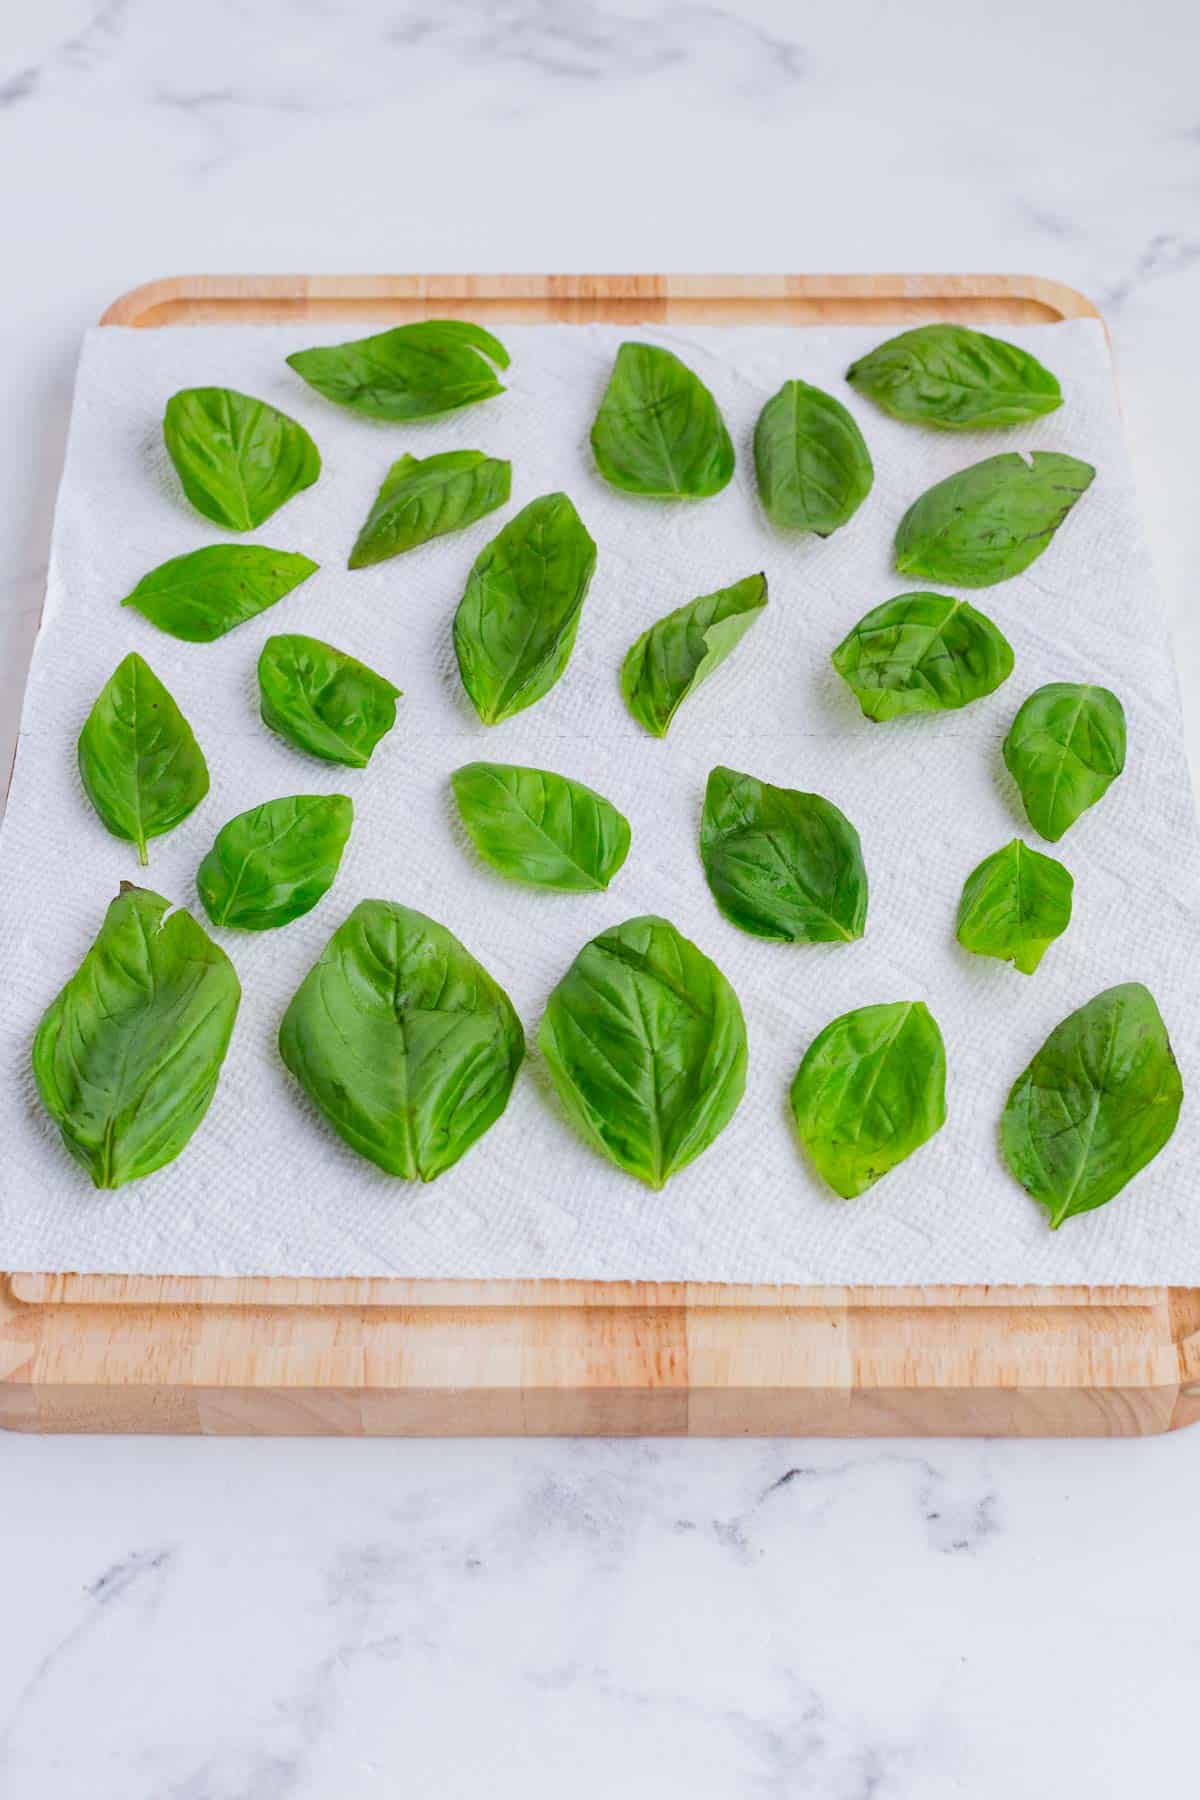 Fresh basil leaves placed on a dry paper towel.